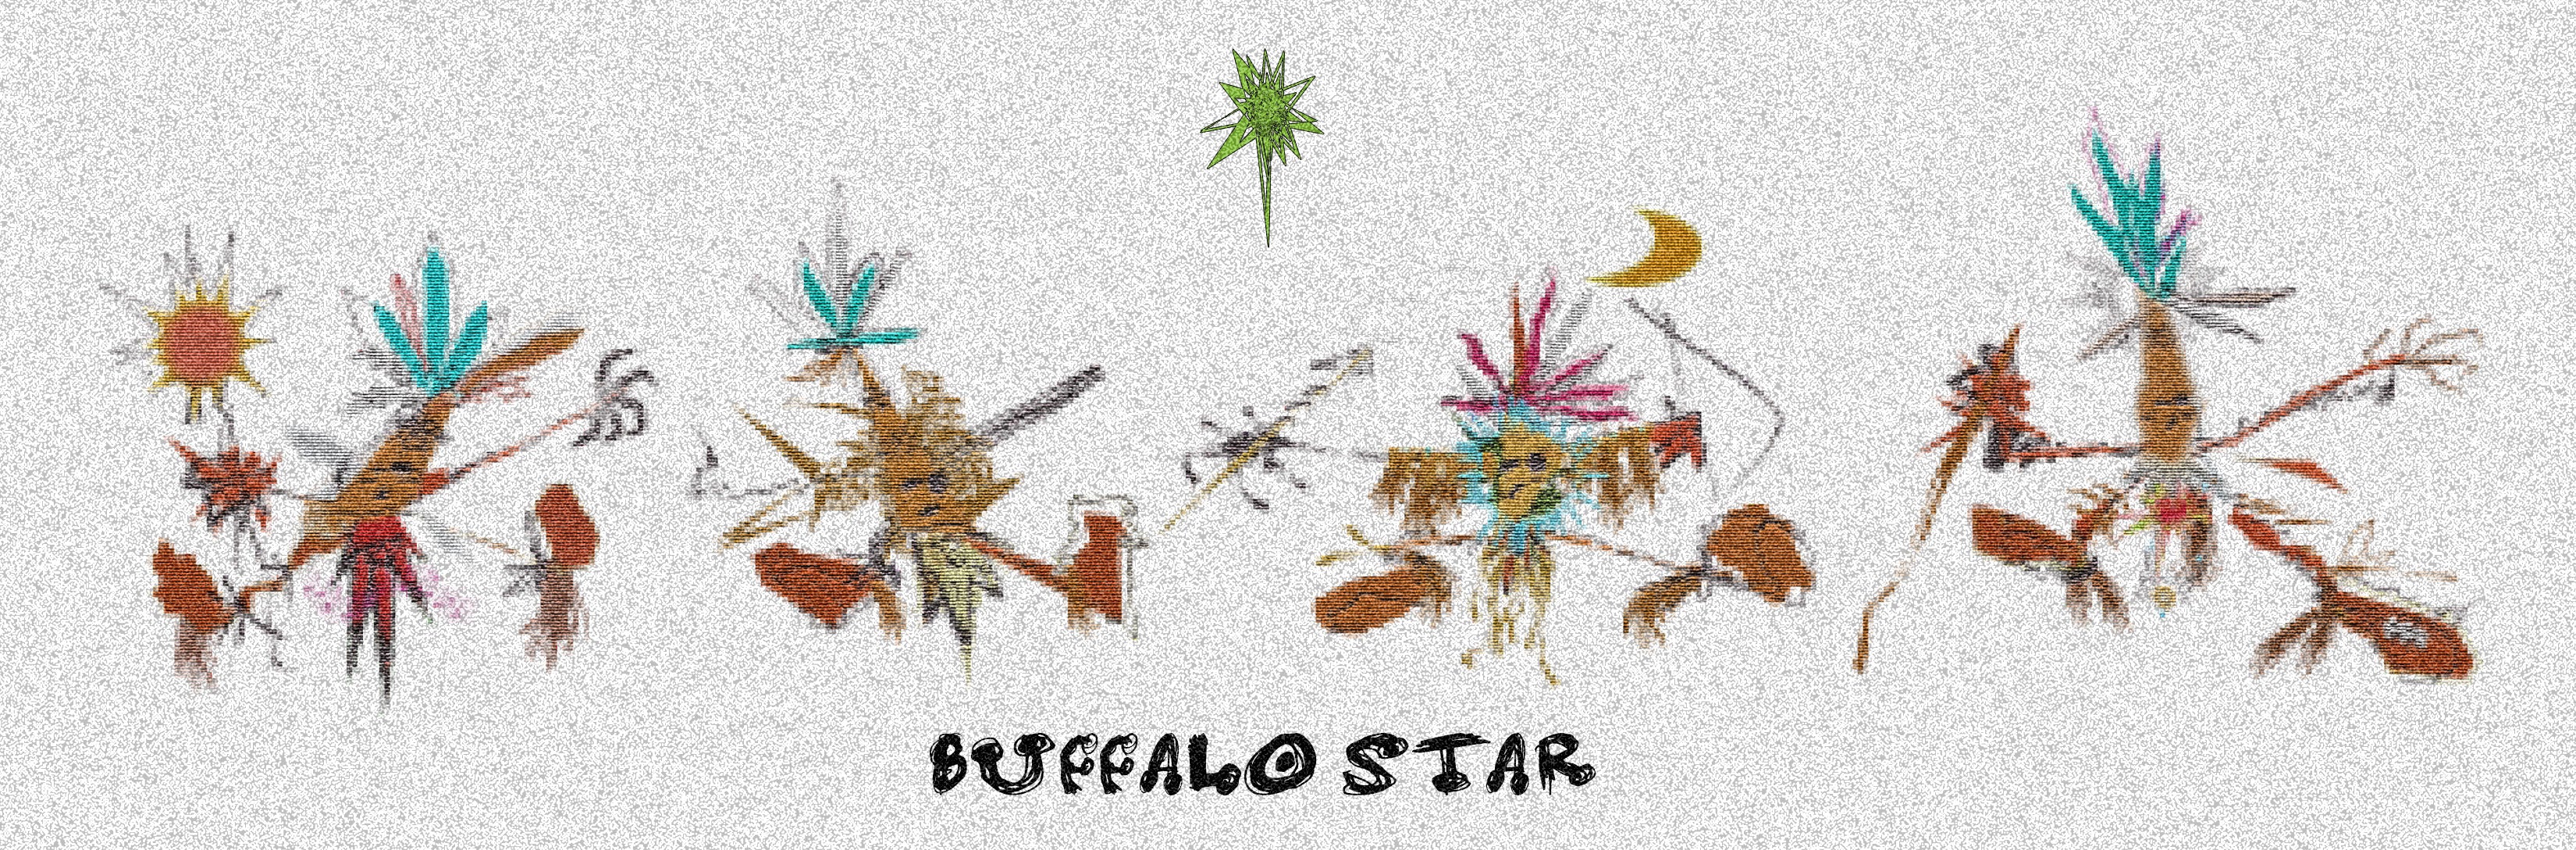 Buffalo Star Shop Banner with Characters